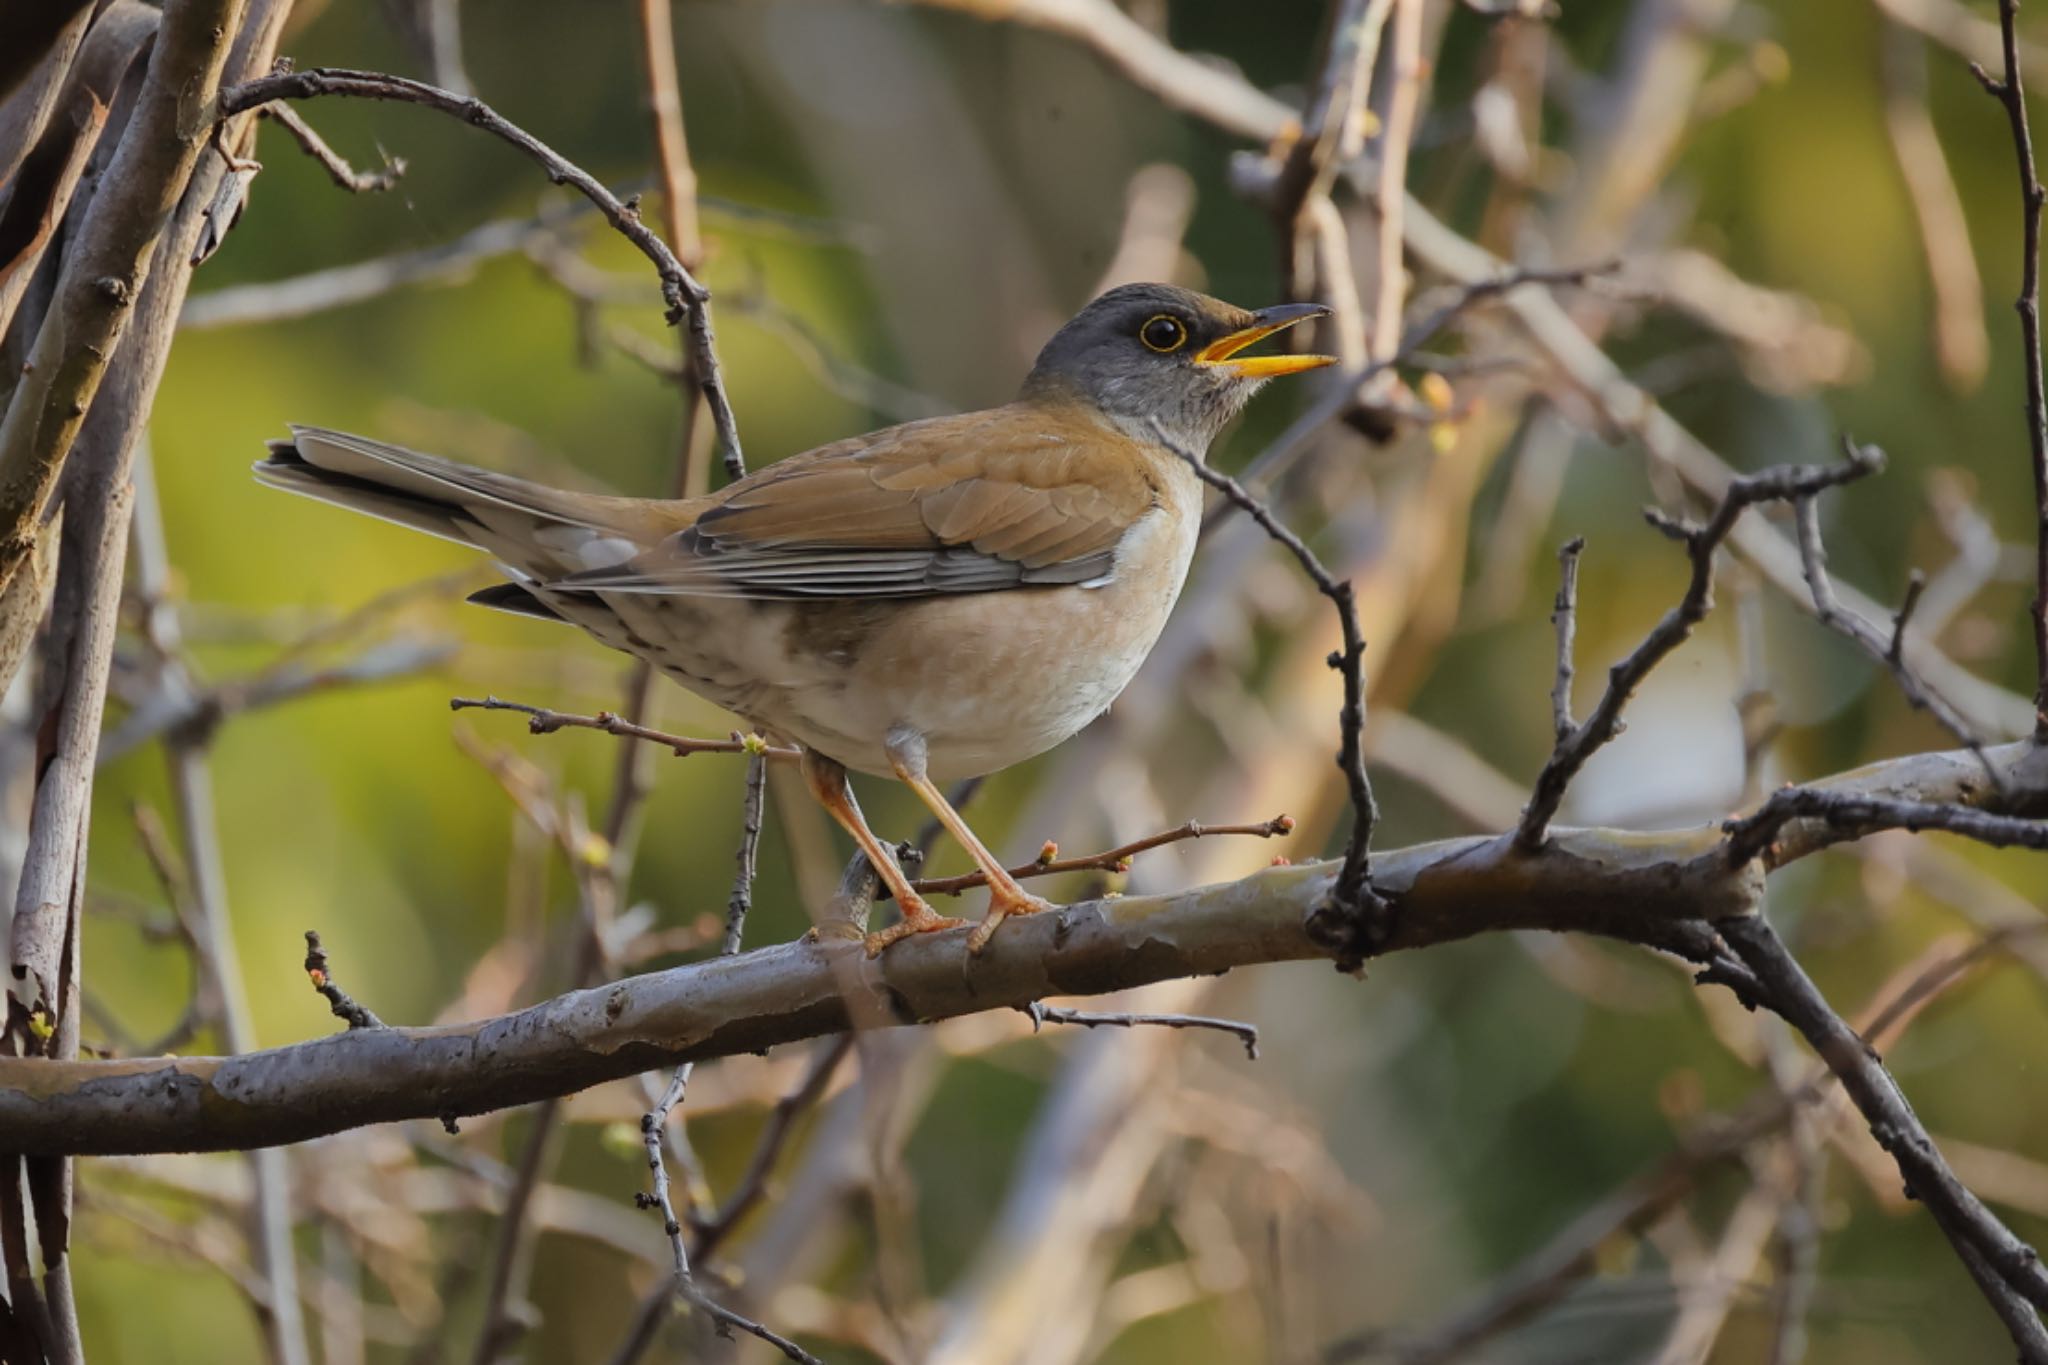 Photo of Pale Thrush at 大野極楽寺公園 by トシさん